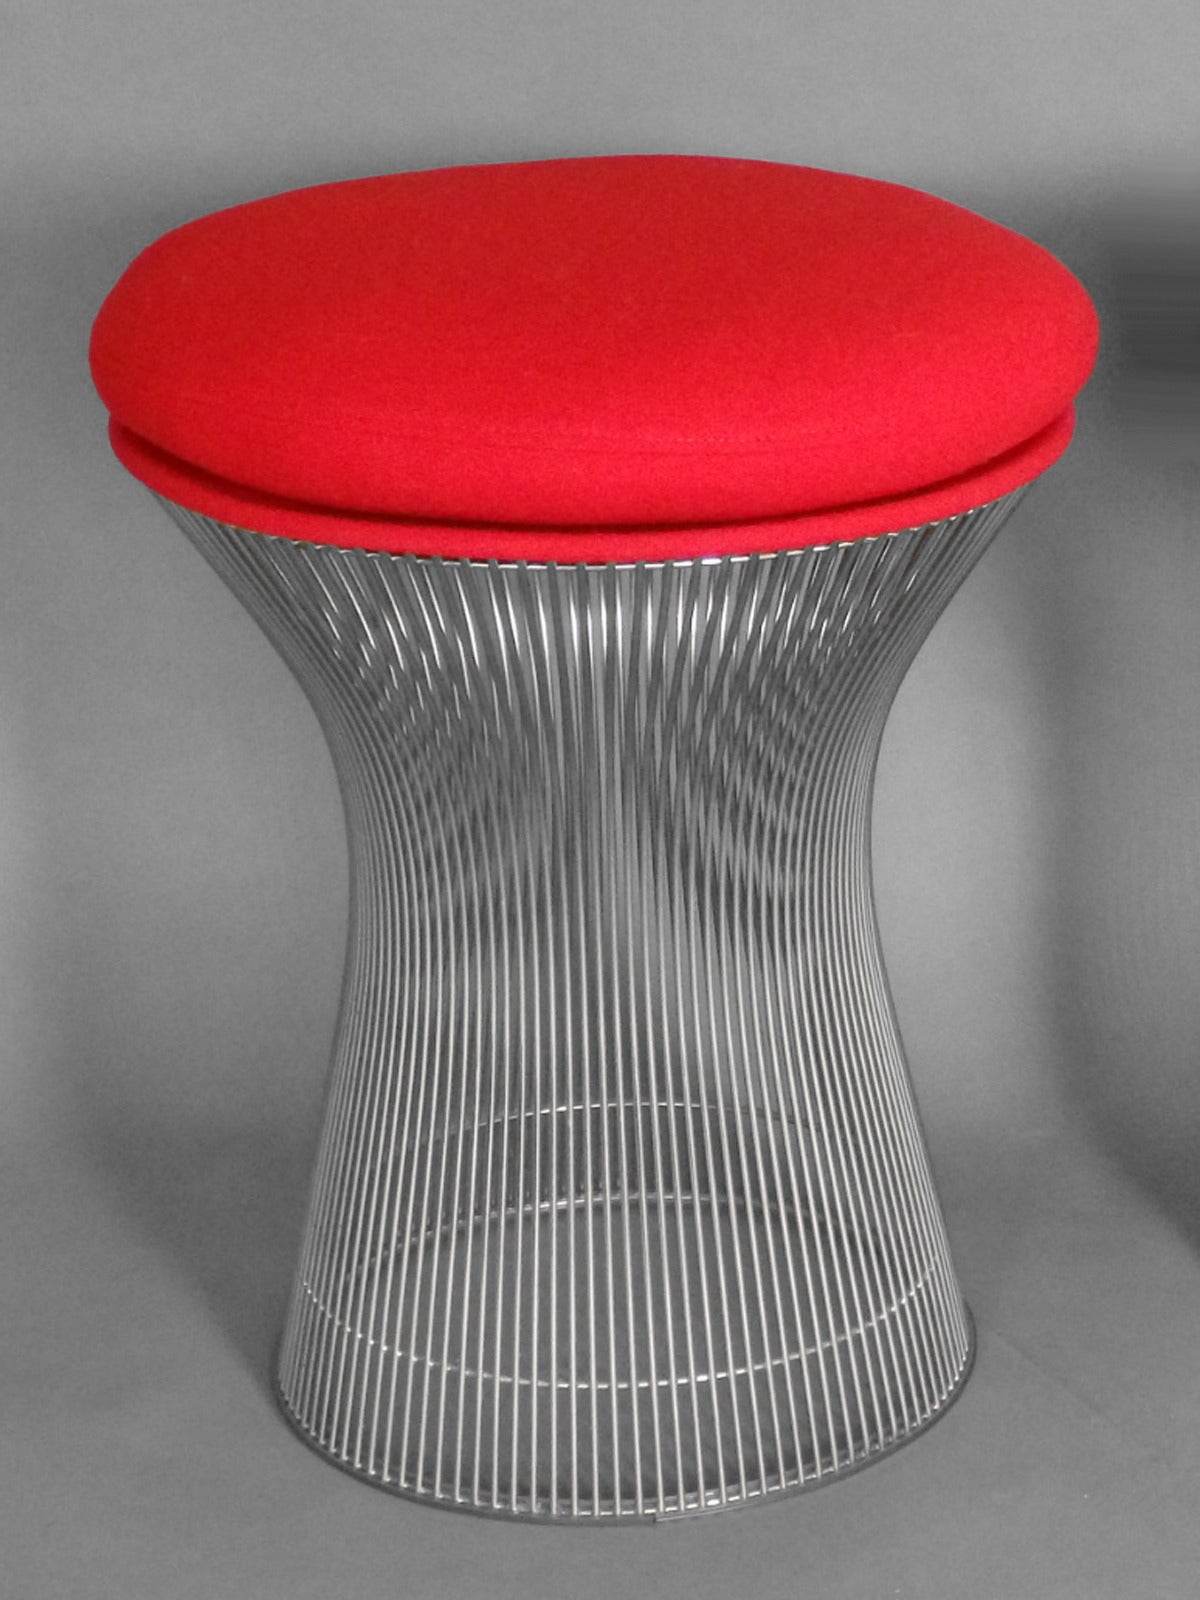 Pair of stools by Warren Platner for Knoll.